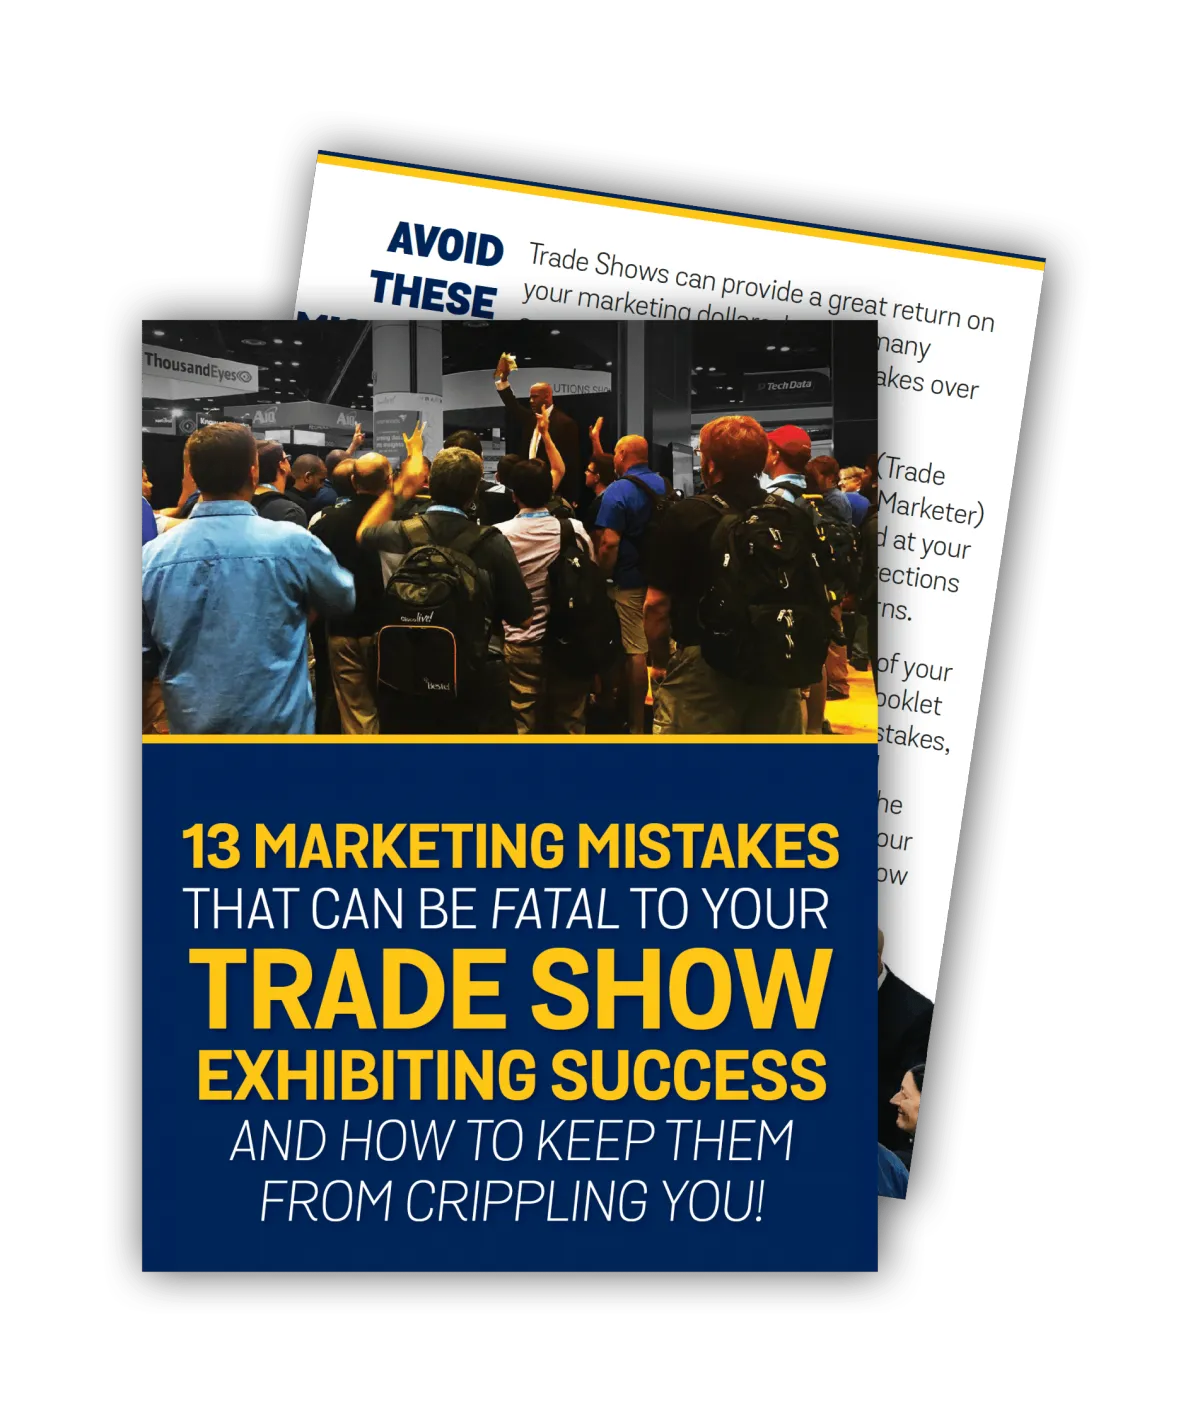 trade show tips and habits